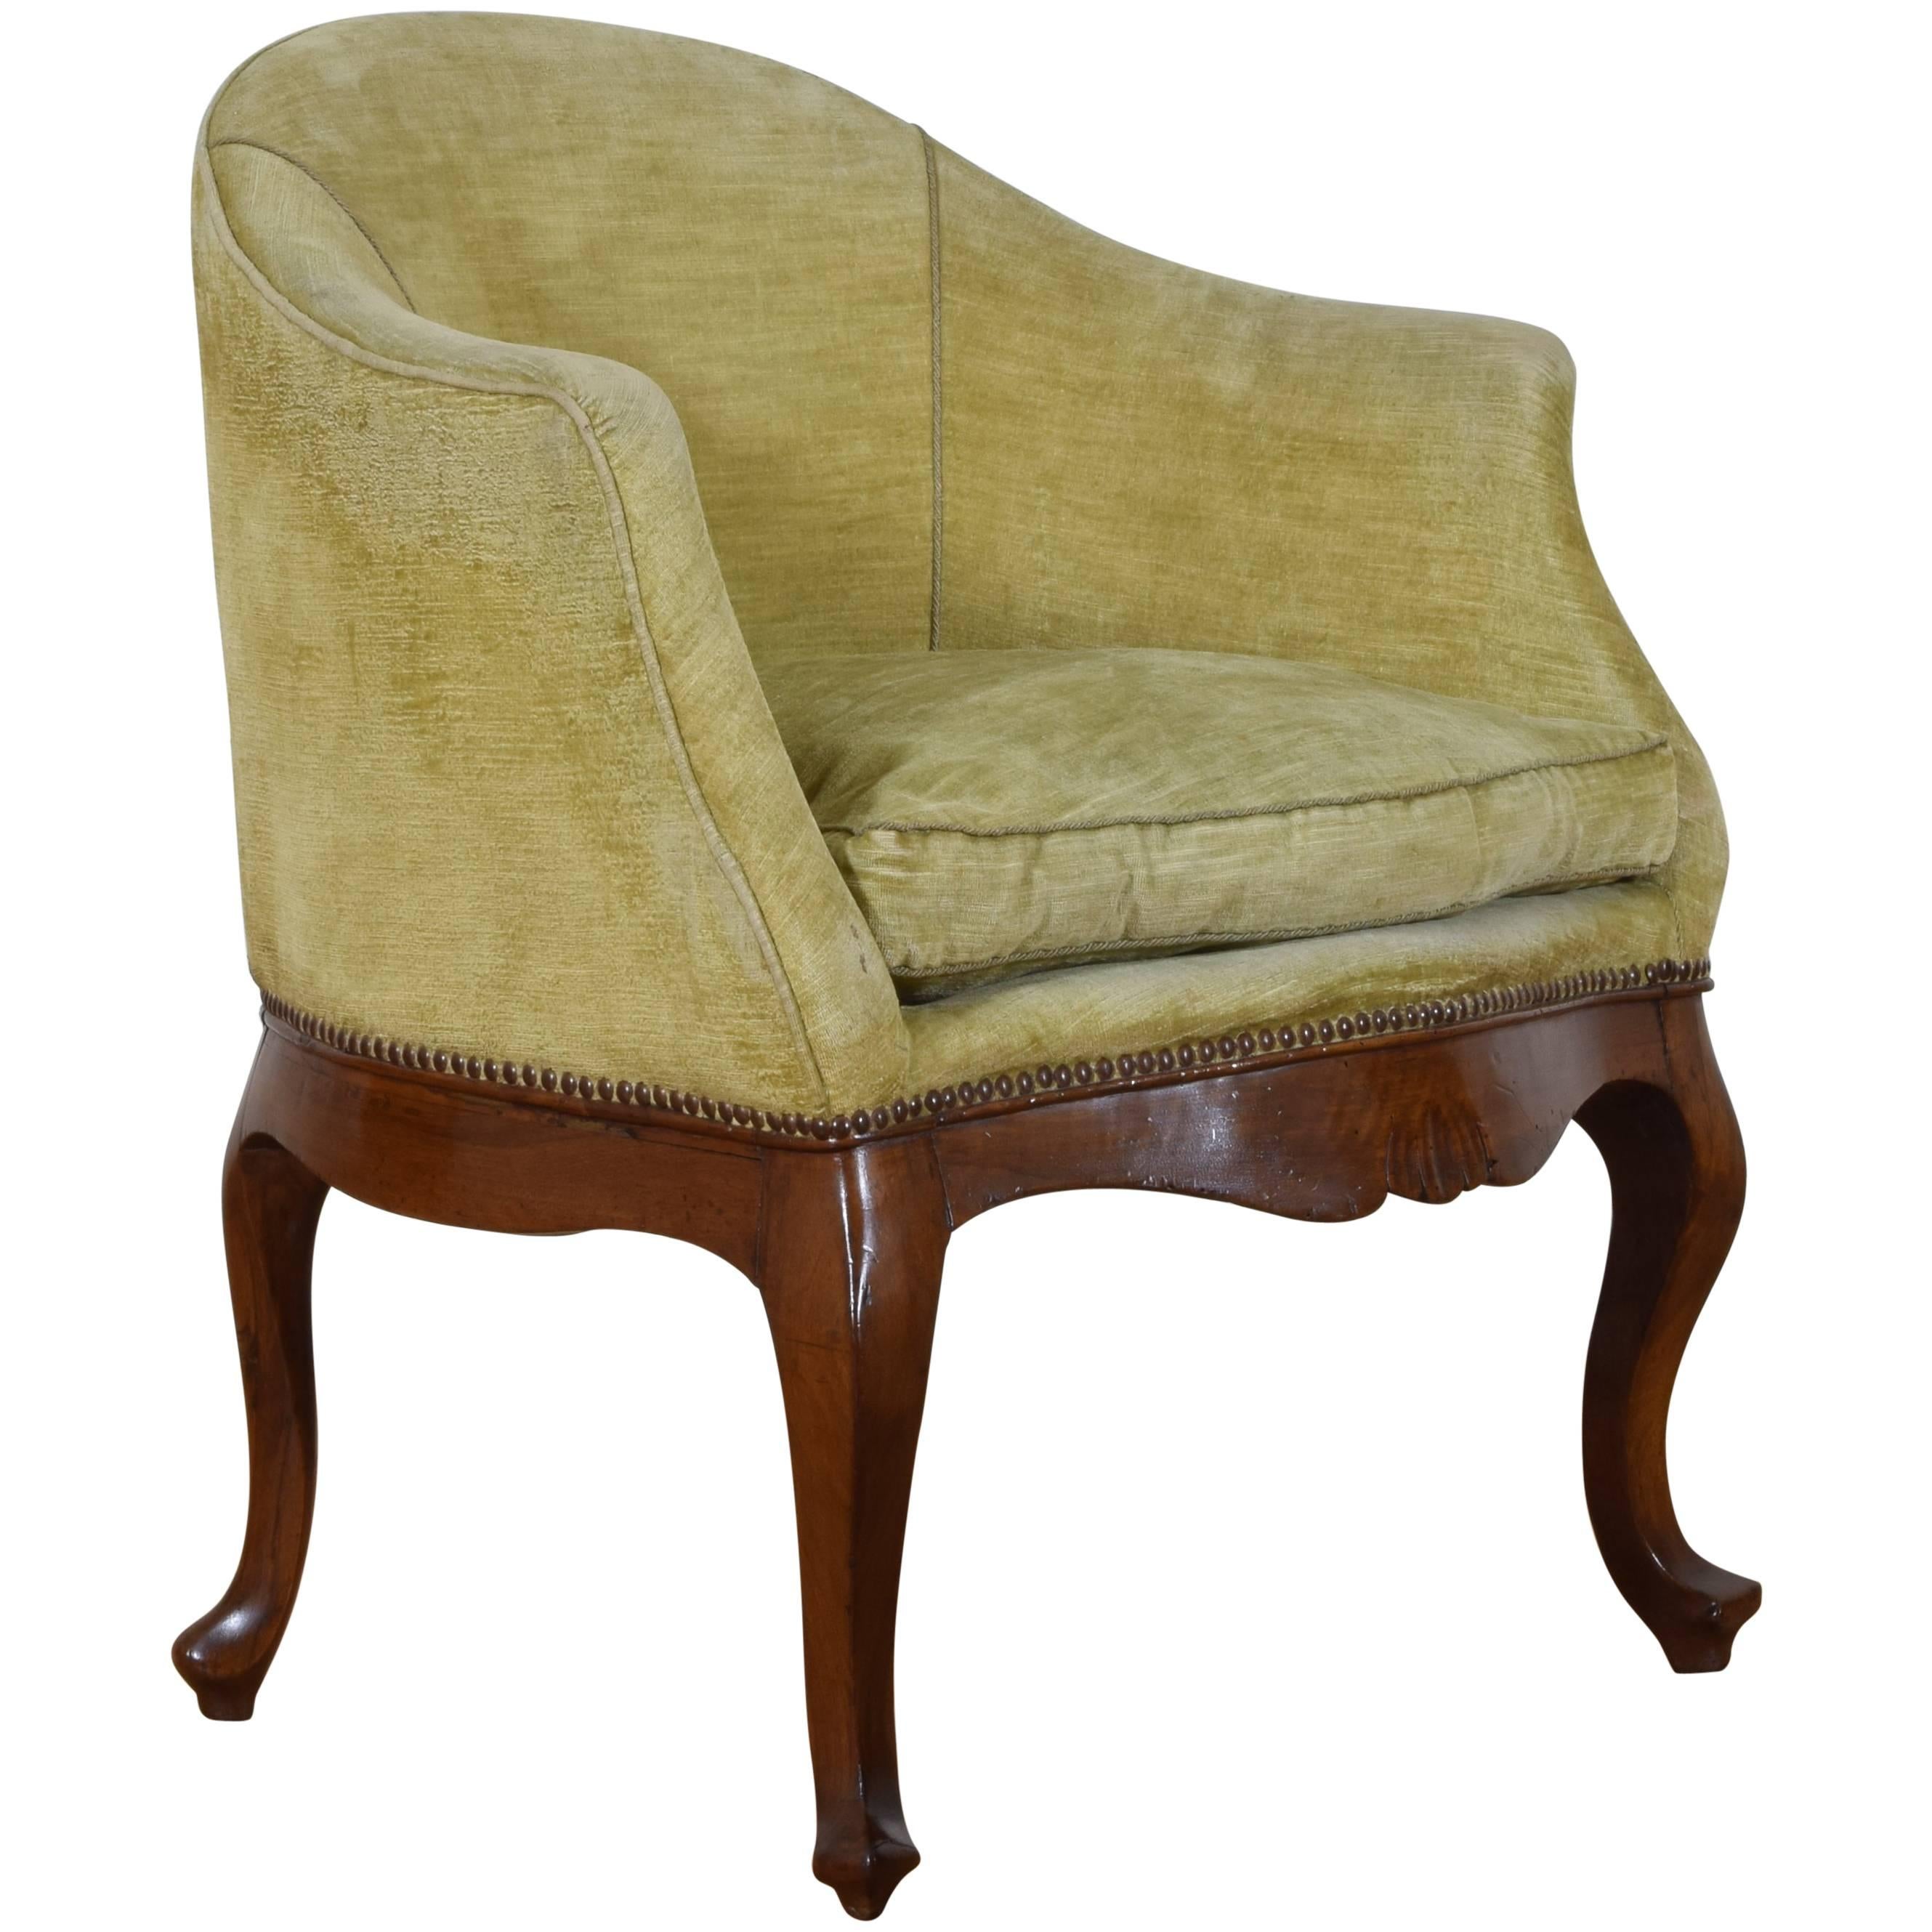 Italian Carved Walnut and Upholstered Bergère from the 19th Century